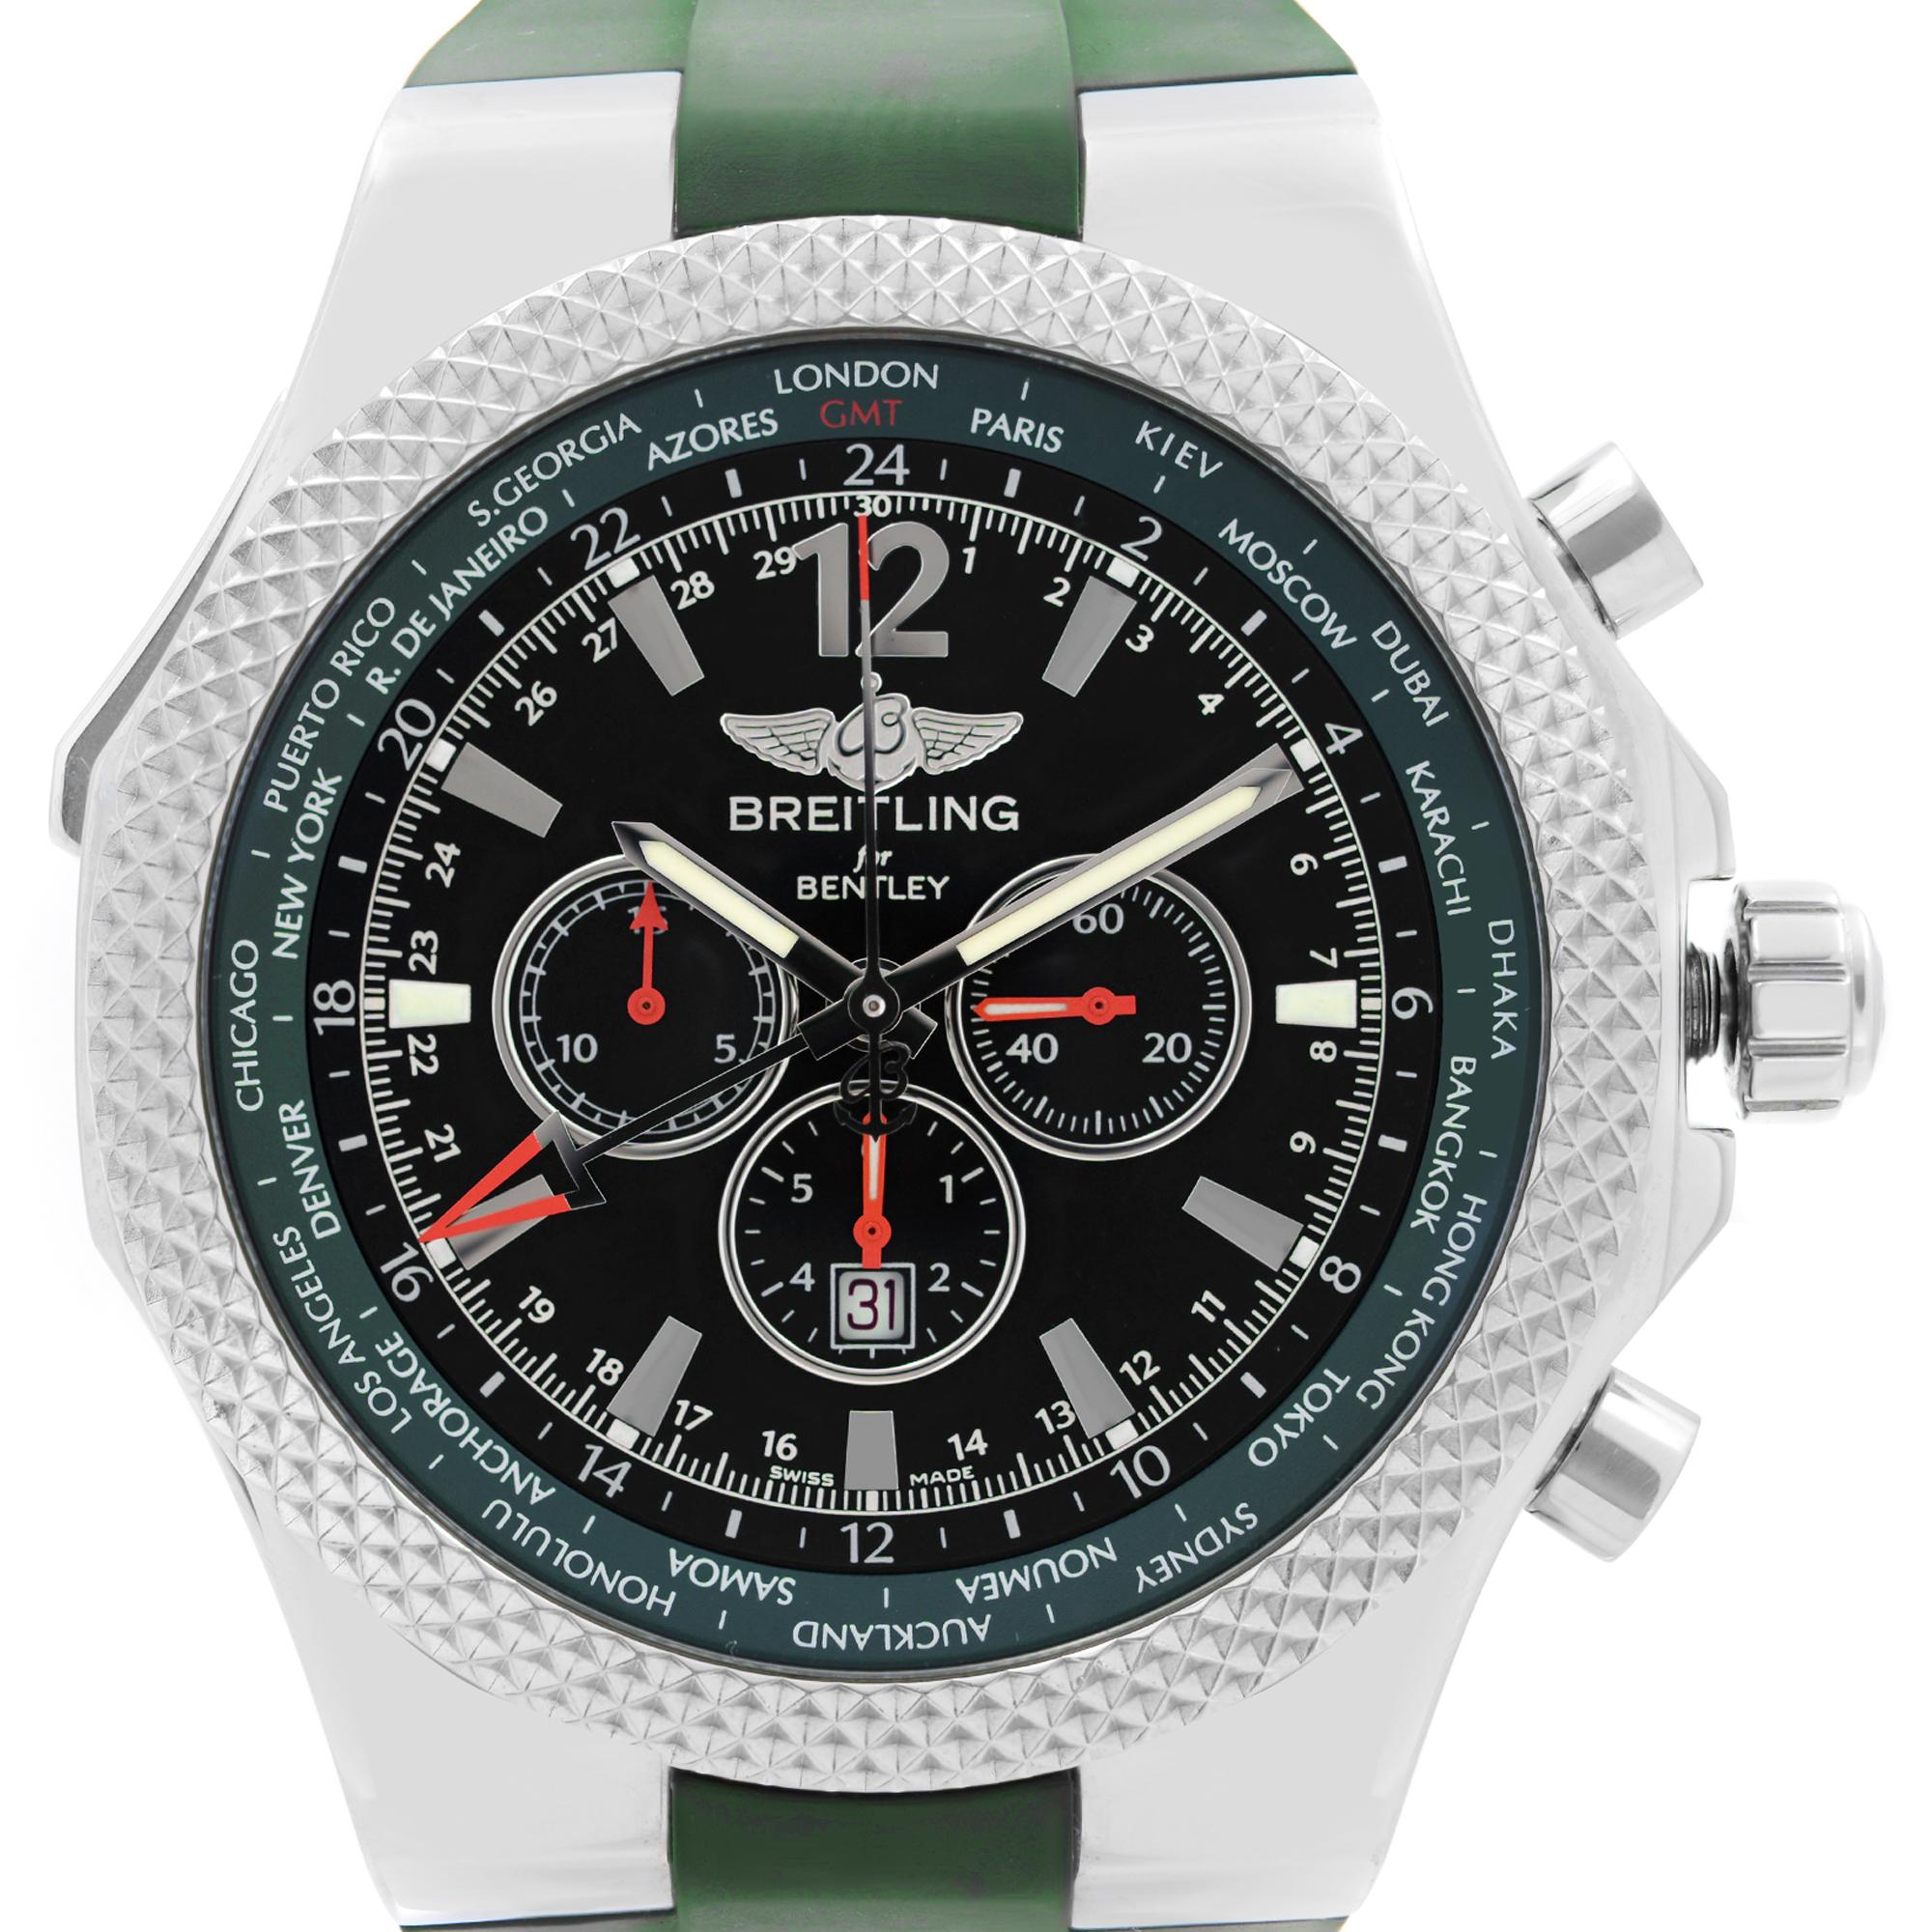 Pre Owned Breitling Bentley GMT 49mm British Racing Green Limited Edition Black Dial Automatic Men's Watch A47362S4.B919-214S. This Beautiful Timepiece Features: Stainless Steel Case with an Olive Green Rubber Strap, Bi-Directional Stainless Steel